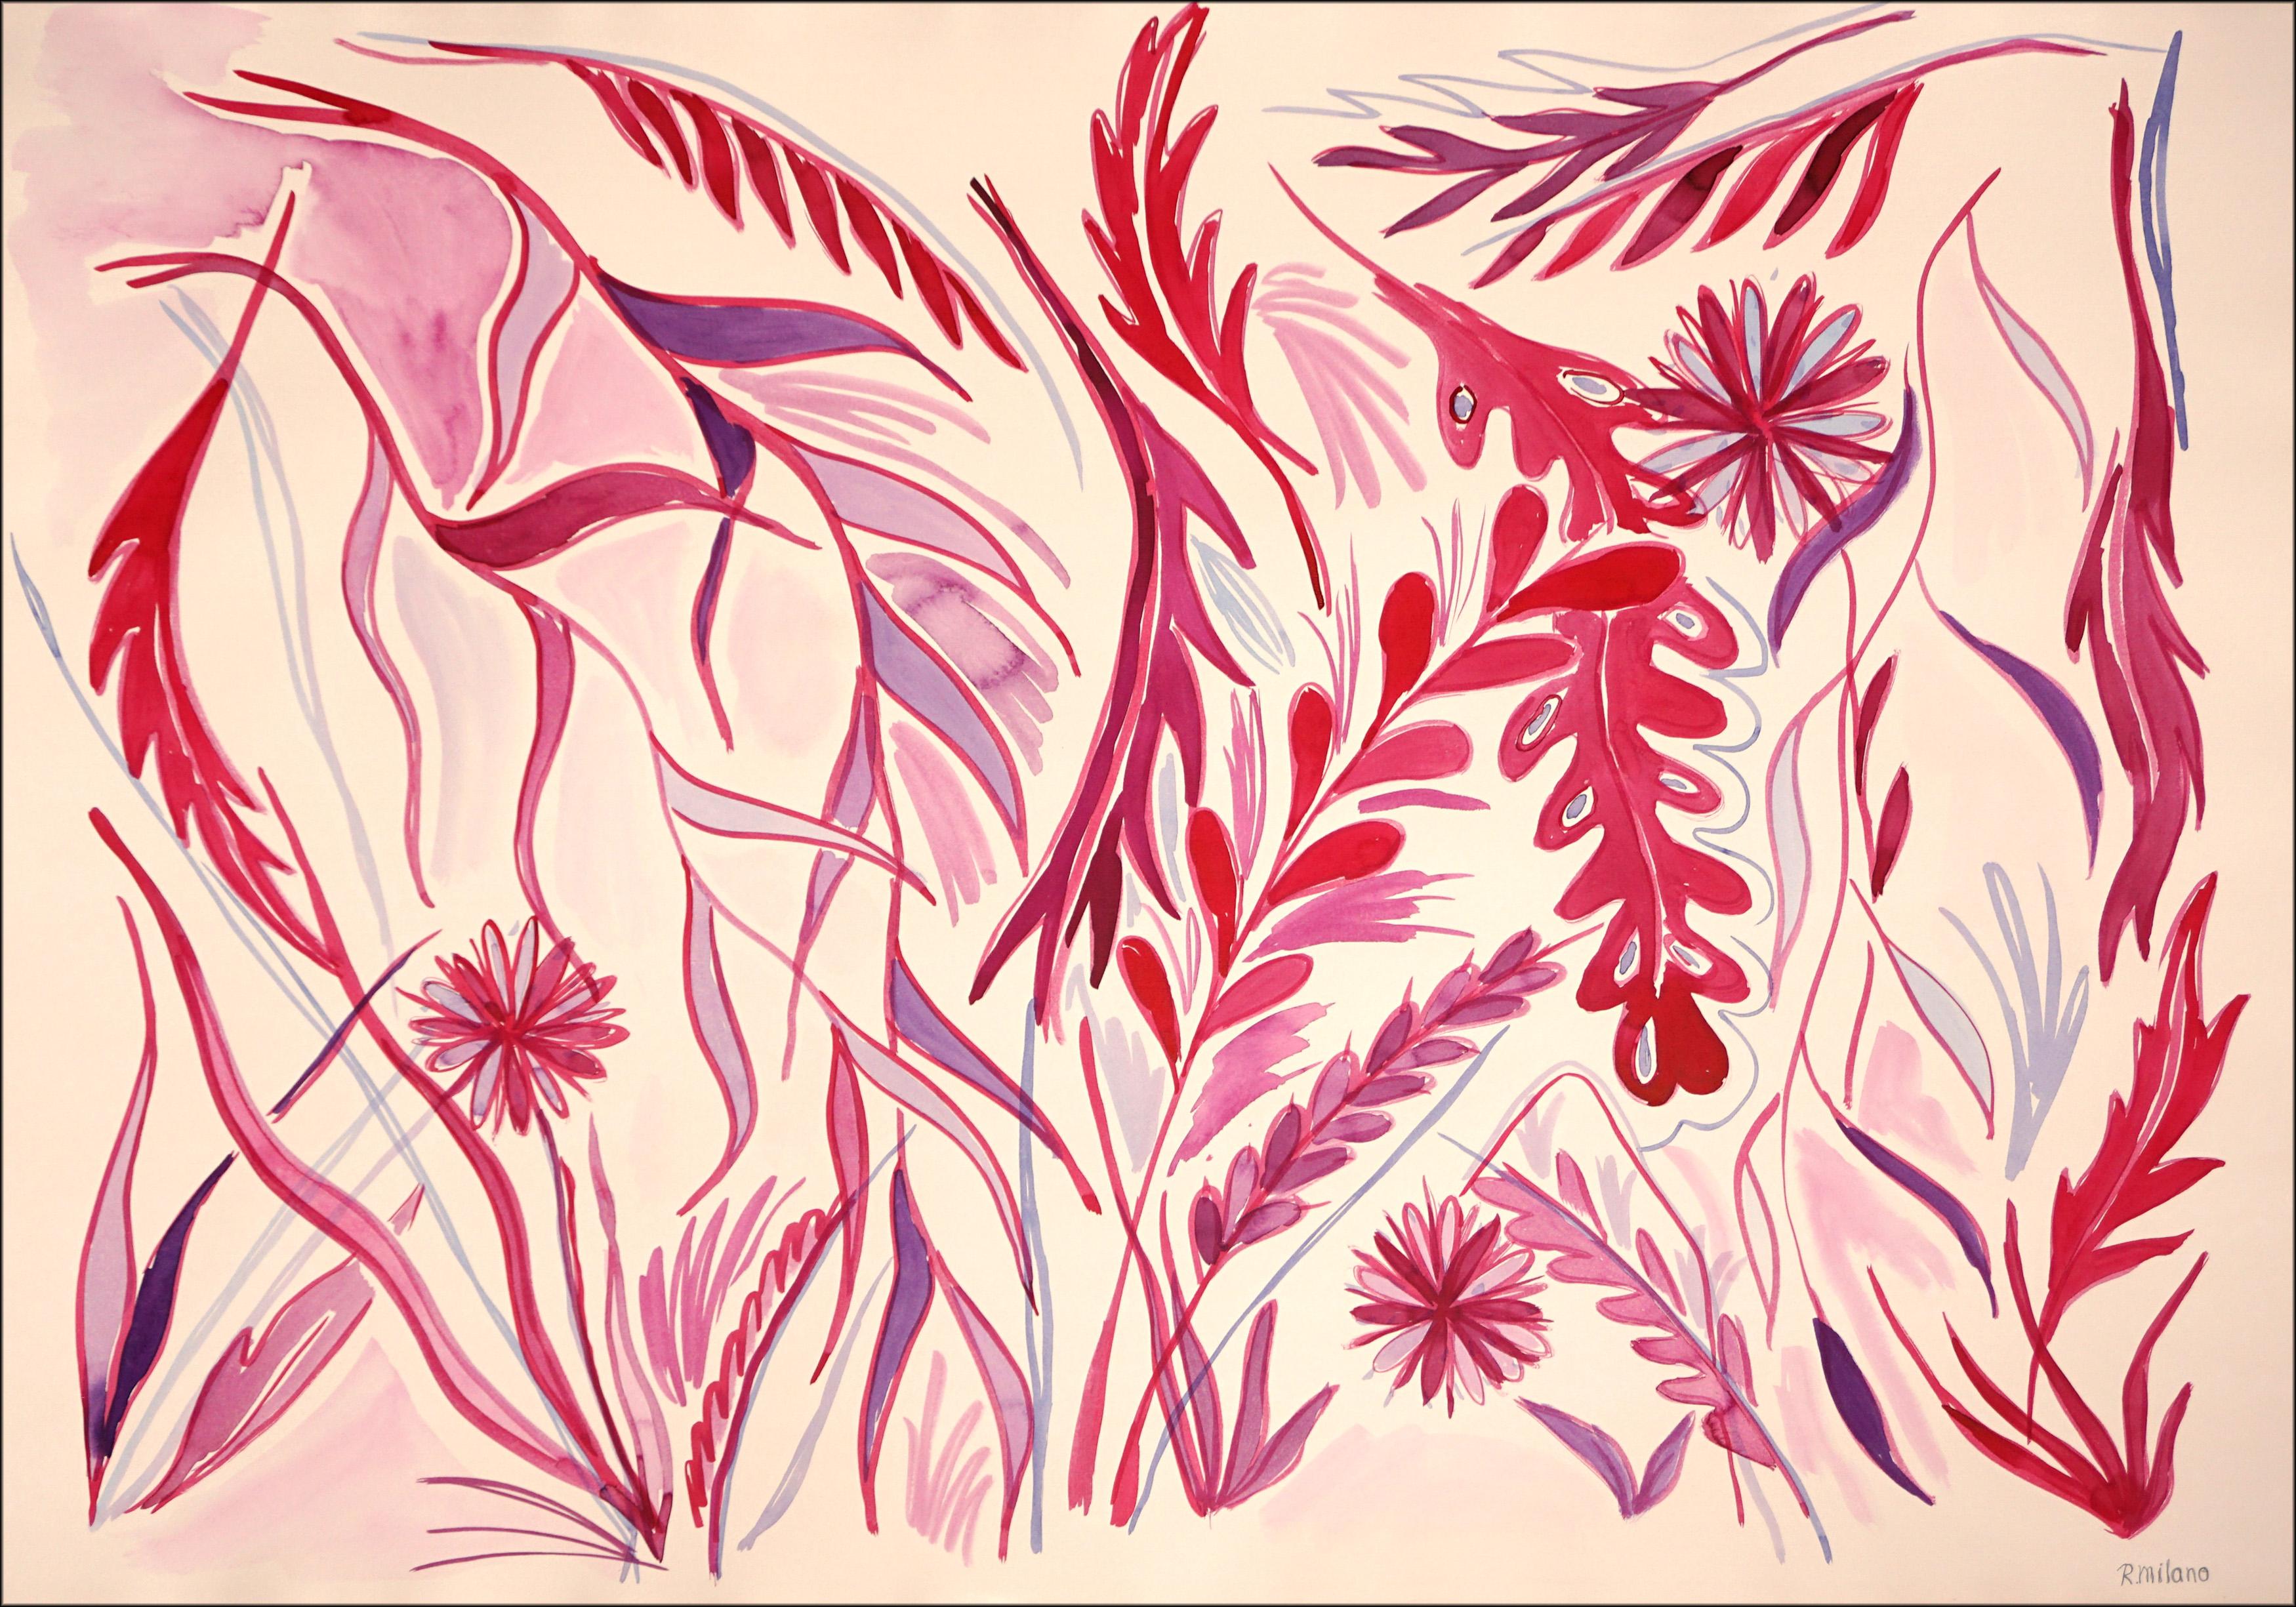 Romina Milano Landscape Painting - The Red Garden, Illustration Style in Red Tones, Wild Dandelion, Pink Leaves 